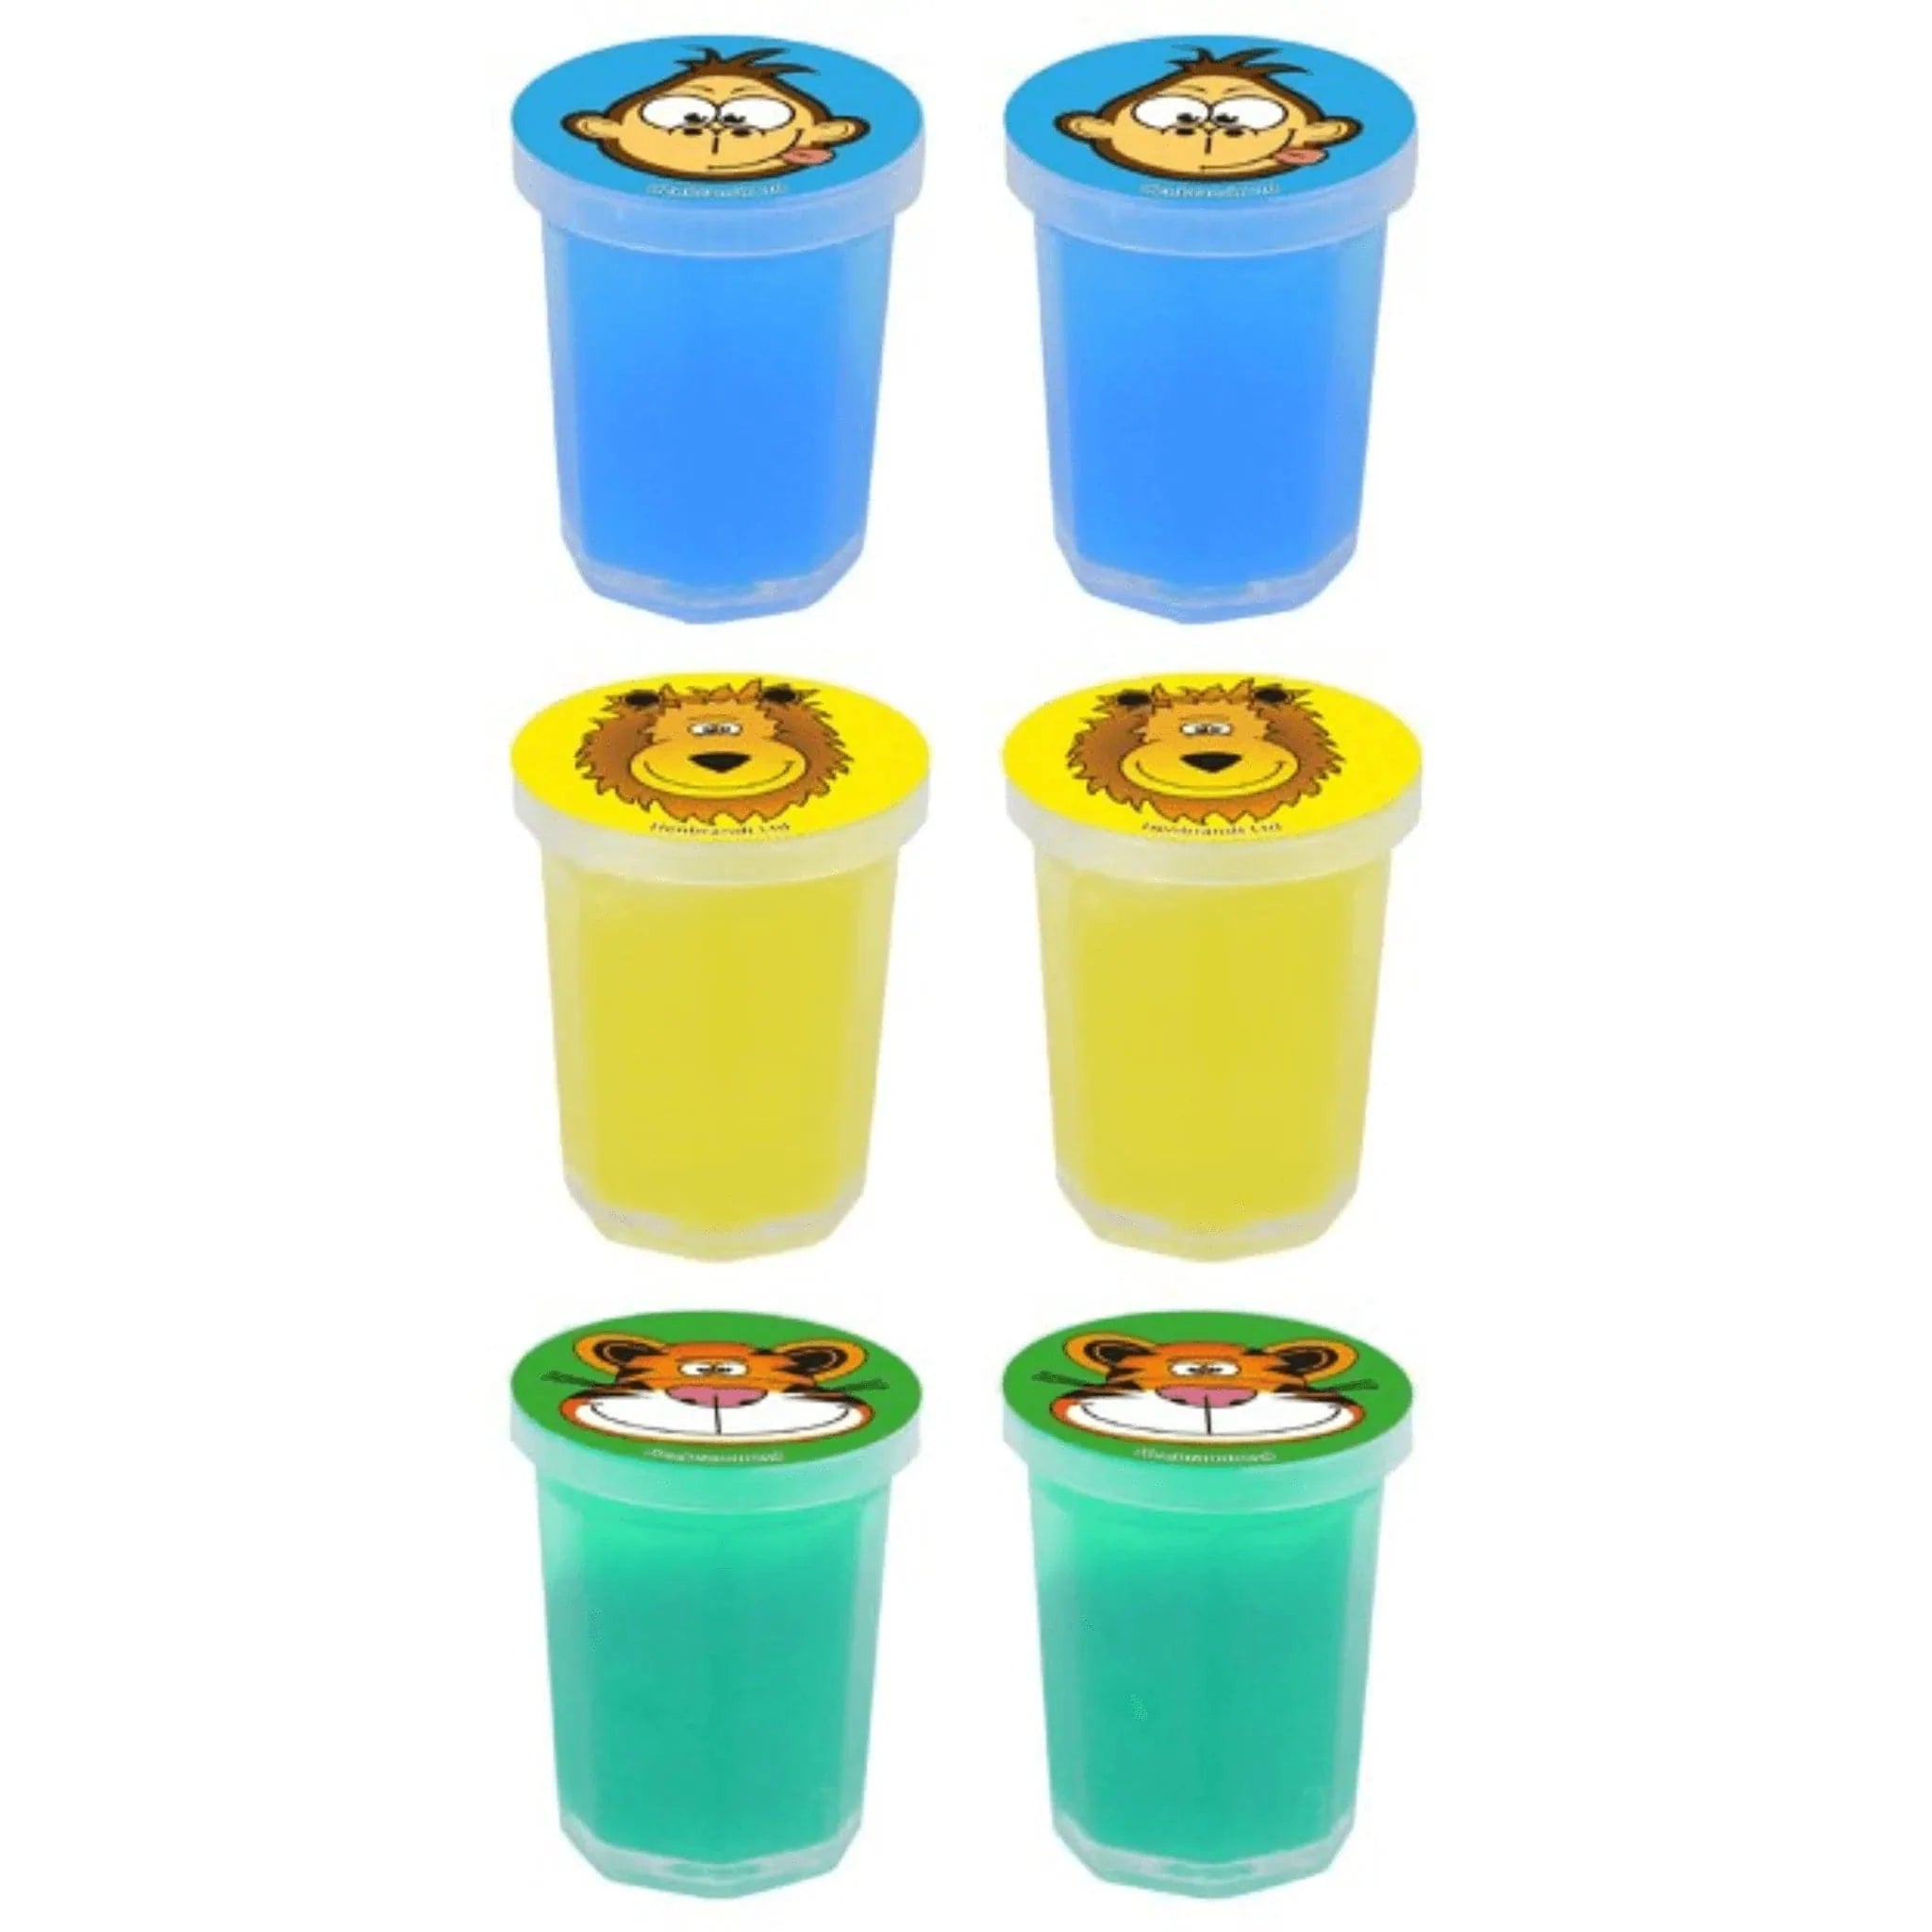 6 Pack Of Jungle Animal Mini Slime Tubs - Kids Party Craft